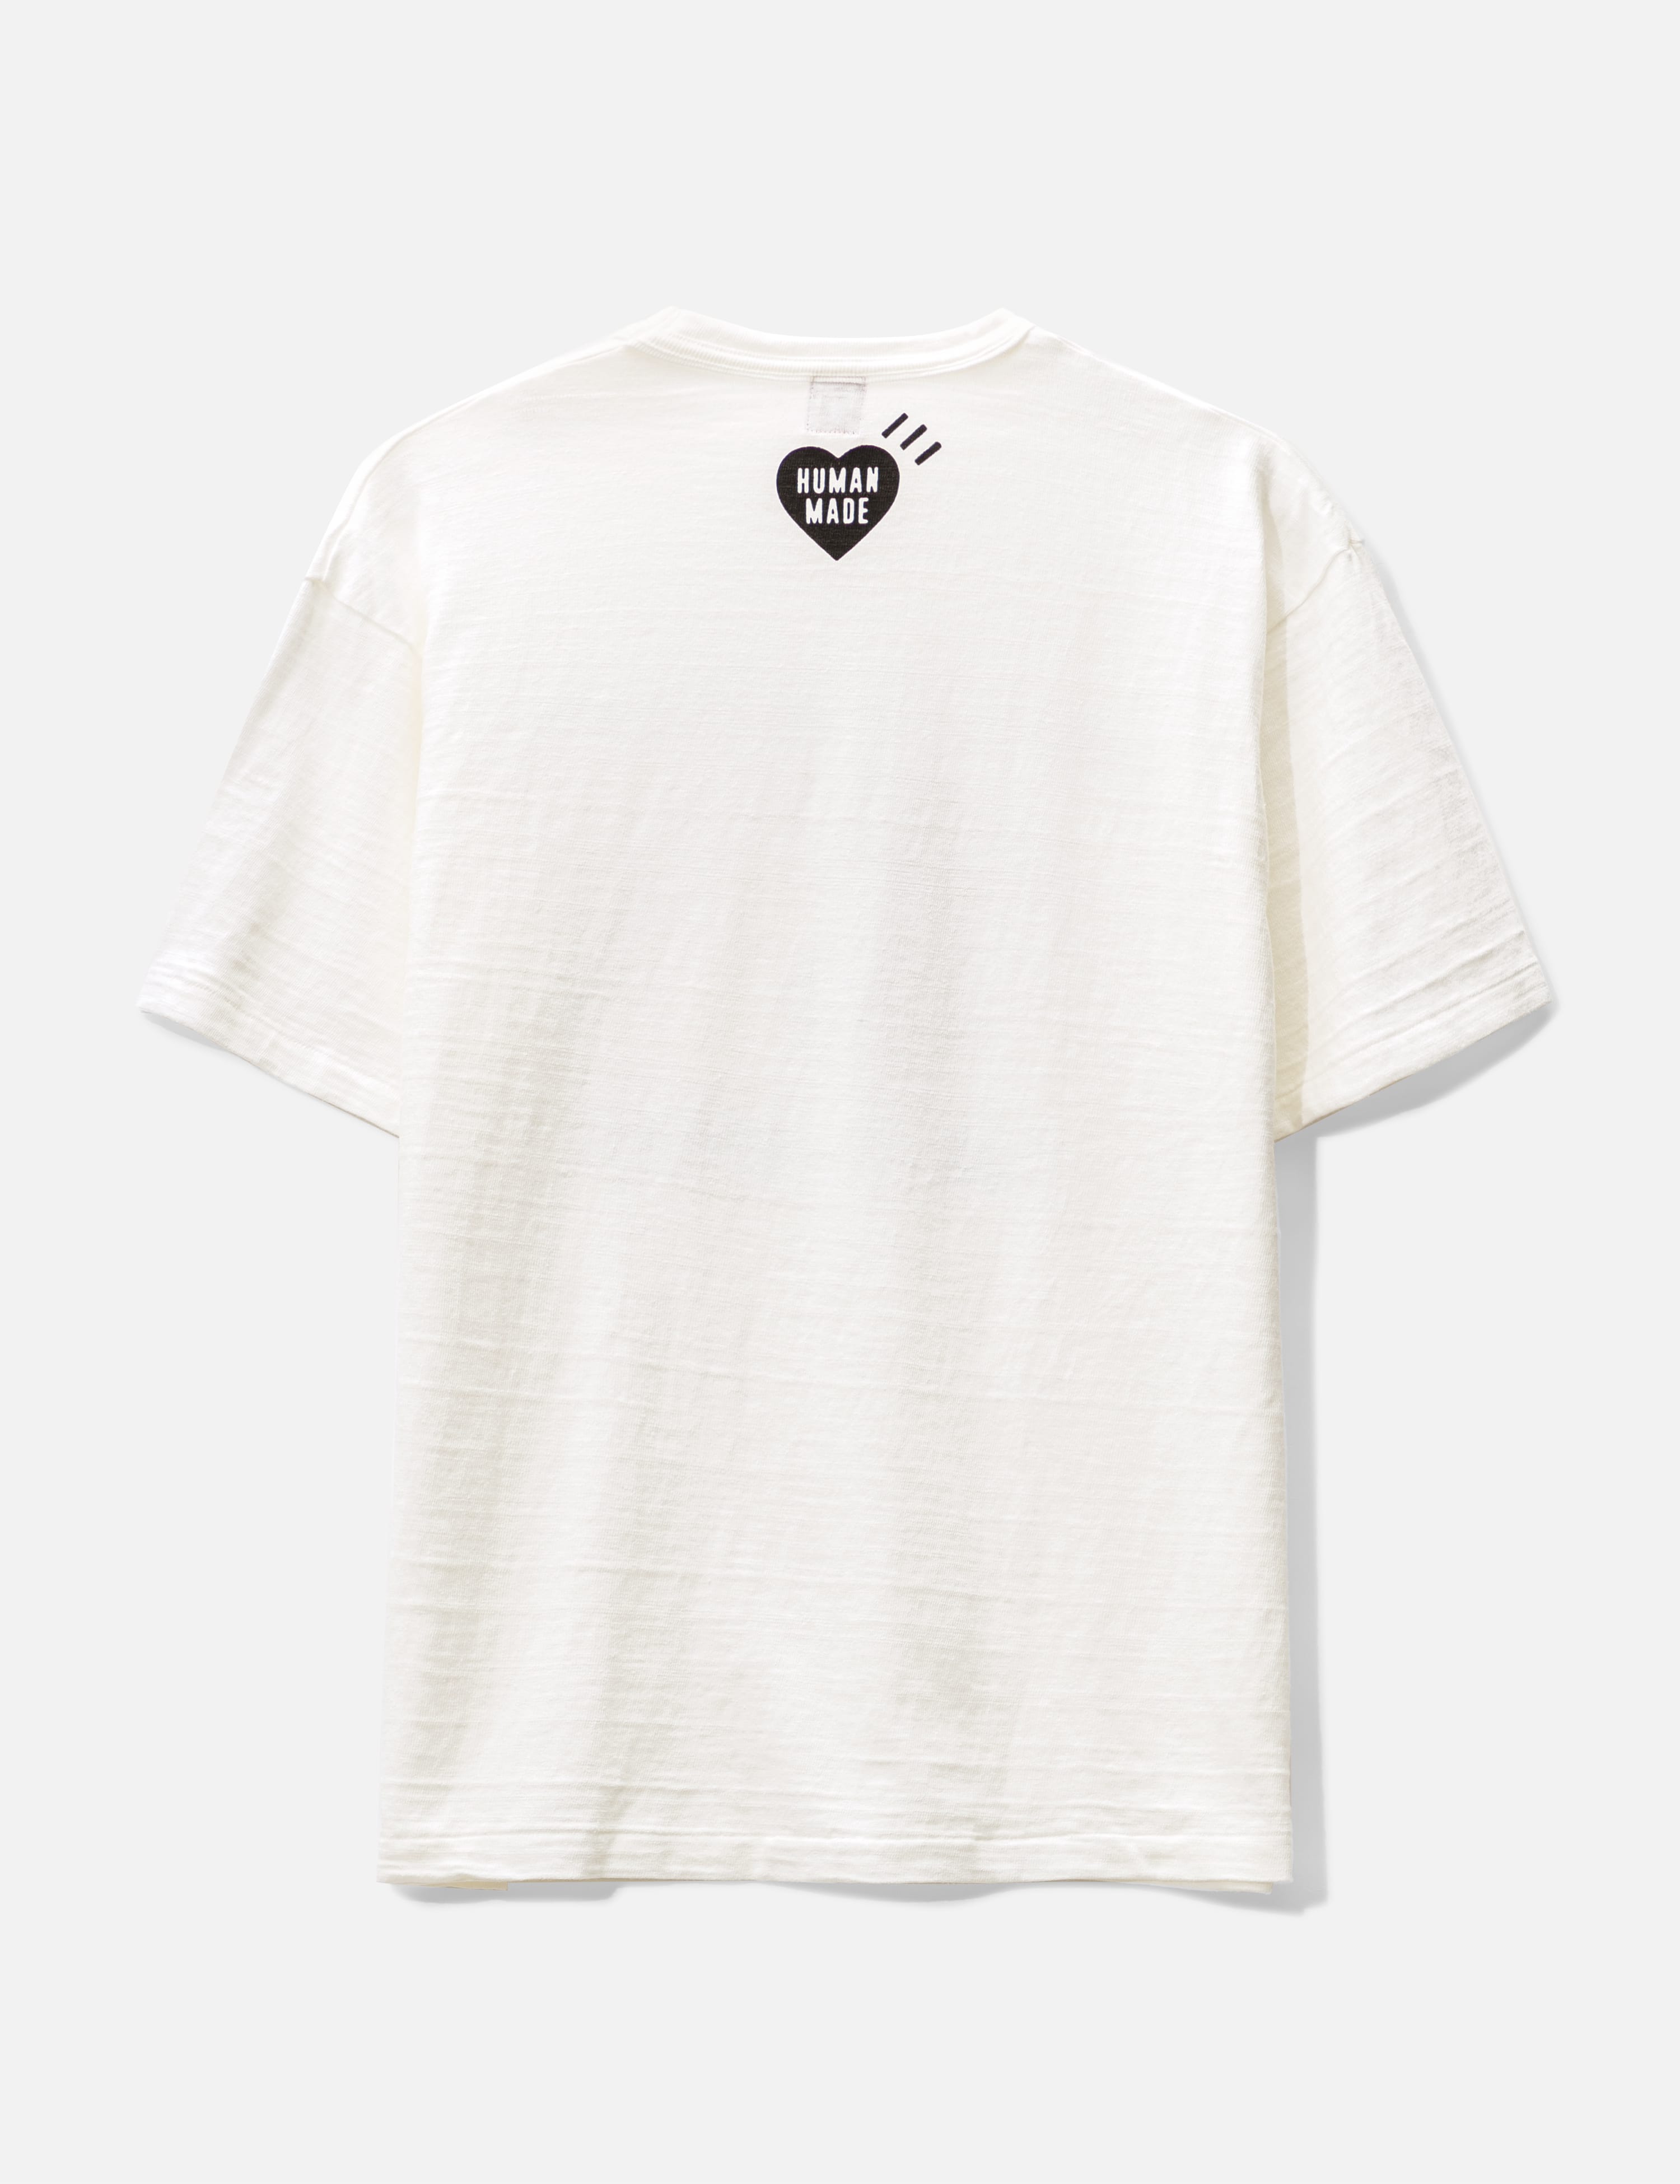 Human Made - Graphic T-shirt #12 | HBX - Globally Curated